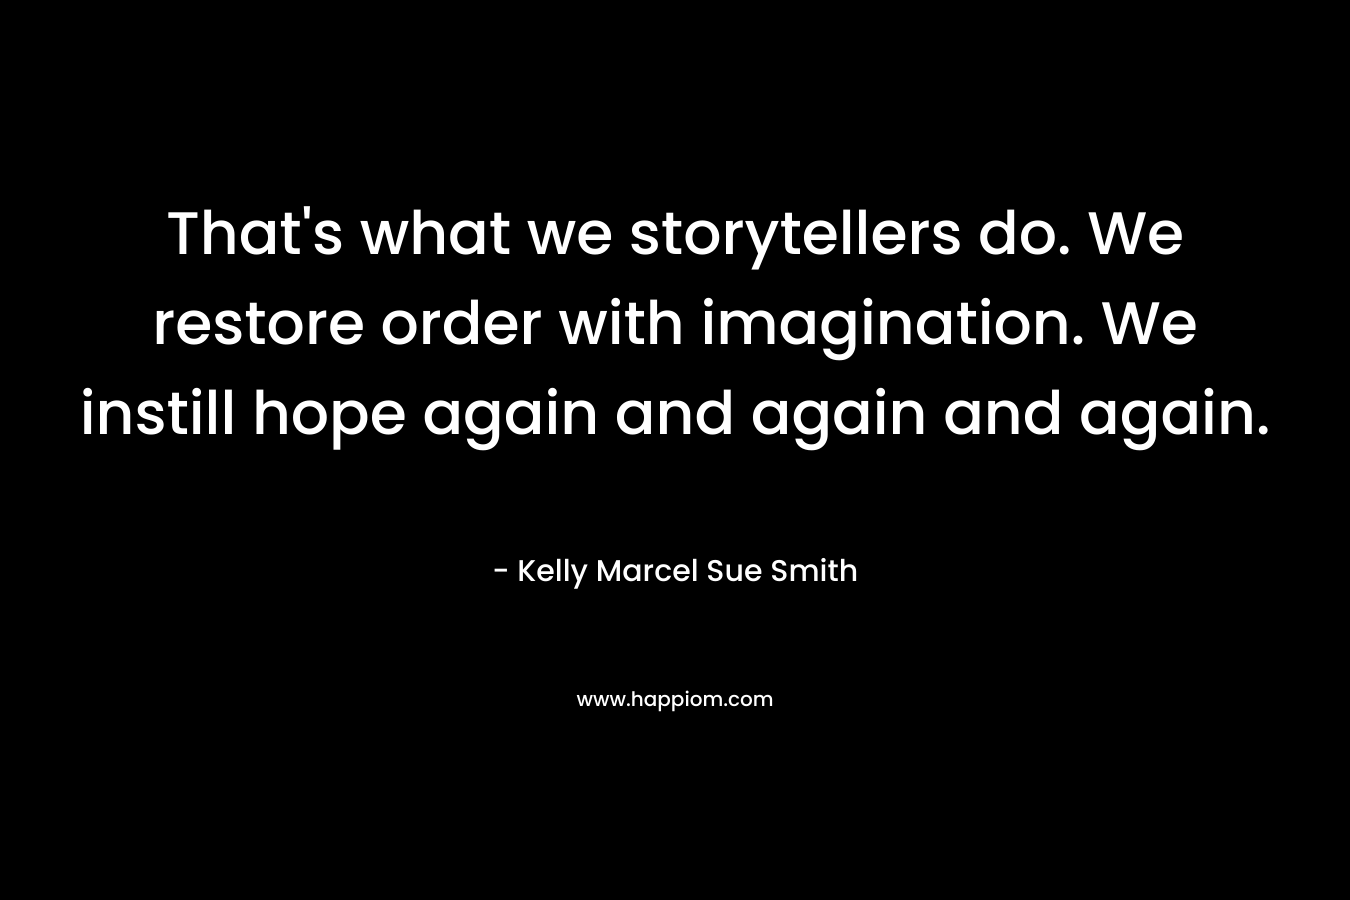 That's what we storytellers do. We restore order with imagination. We instill hope again and again and again.